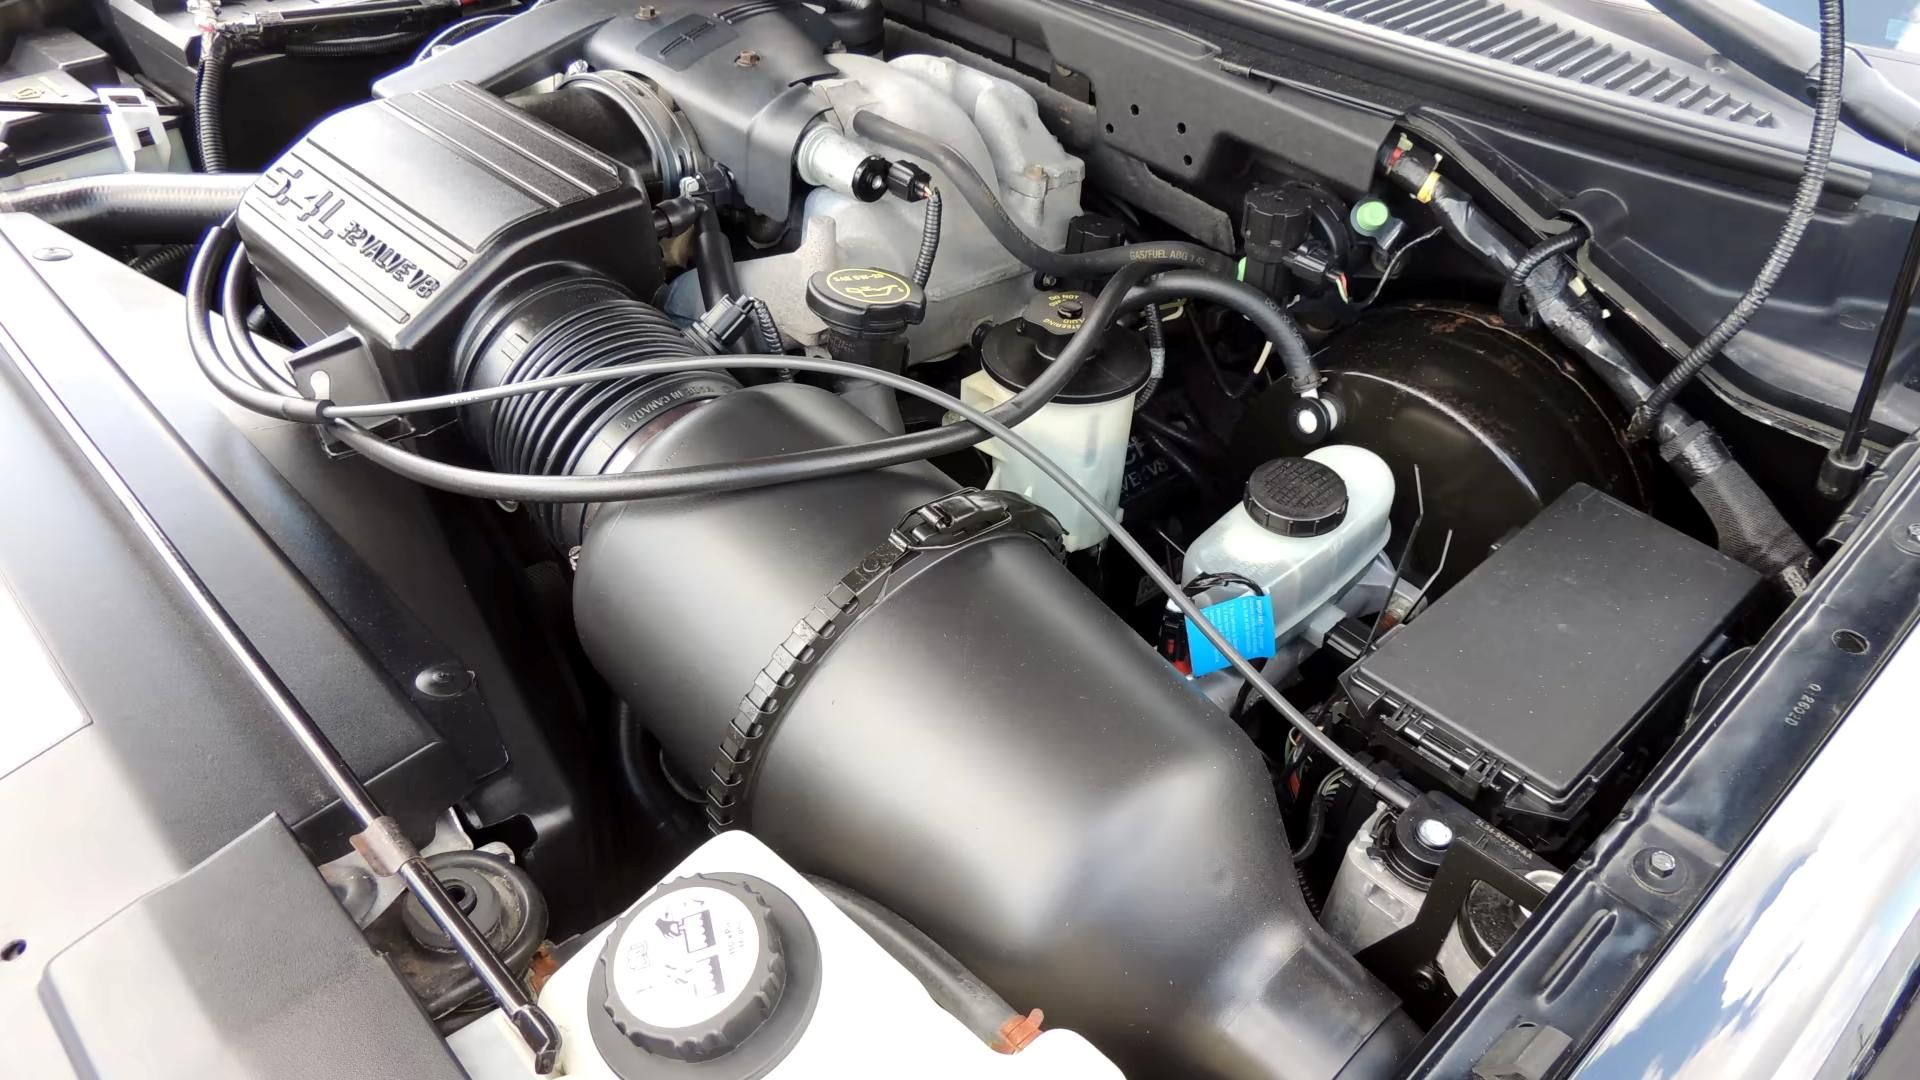 Specs, Reliability And Common Uses Of Ford's 5.4L Triton Engine